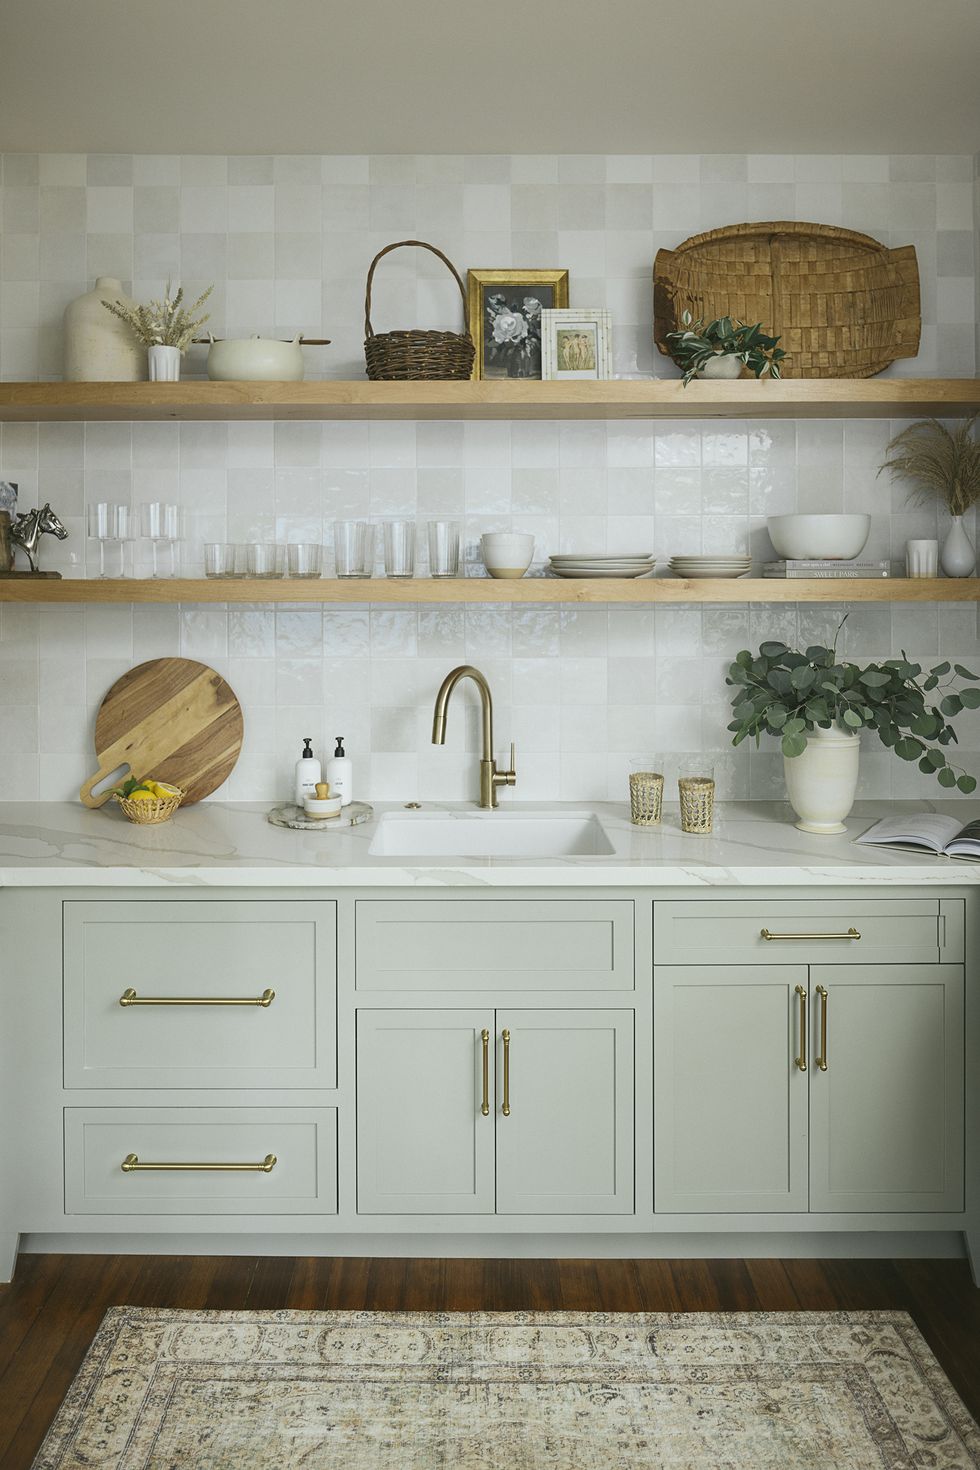 Green Kitchen Cabinets with Gray and Gold Marble - Contemporary - Kitchen